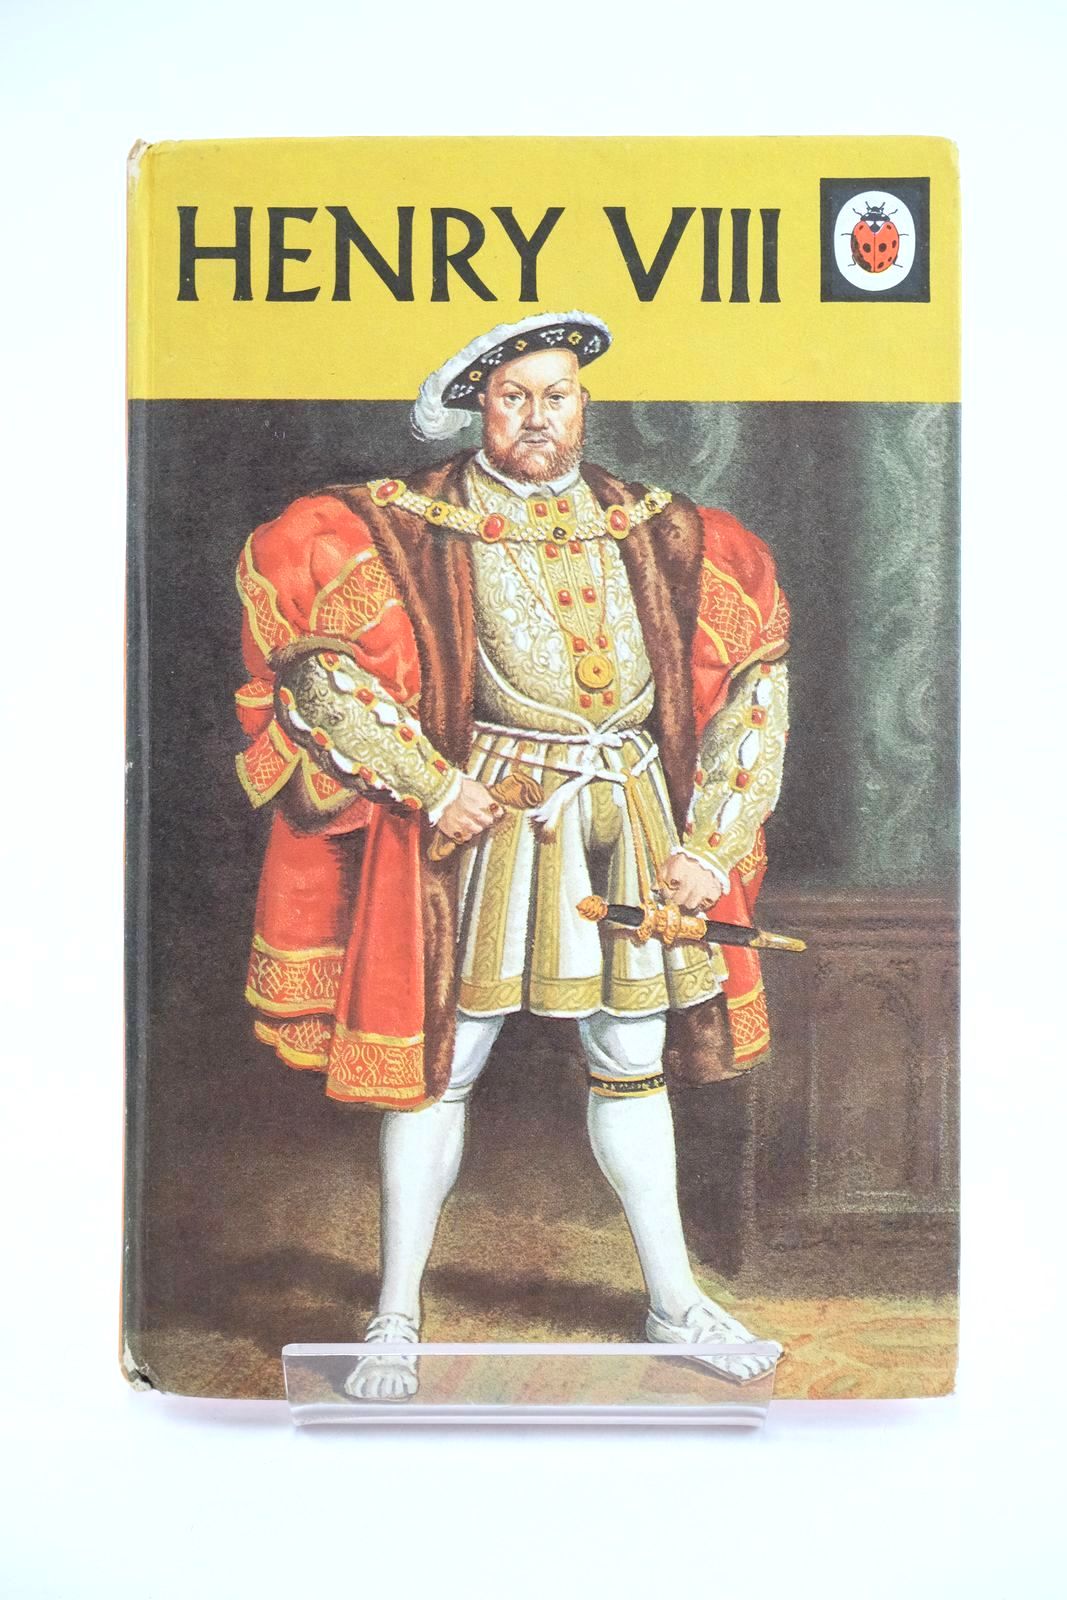 Photo of HENRY VIII written by Peach, L. Du Garde illustrated by Humphris, Frank published by Ladybird Books Ltd (STOCK CODE: 1324406)  for sale by Stella & Rose's Books